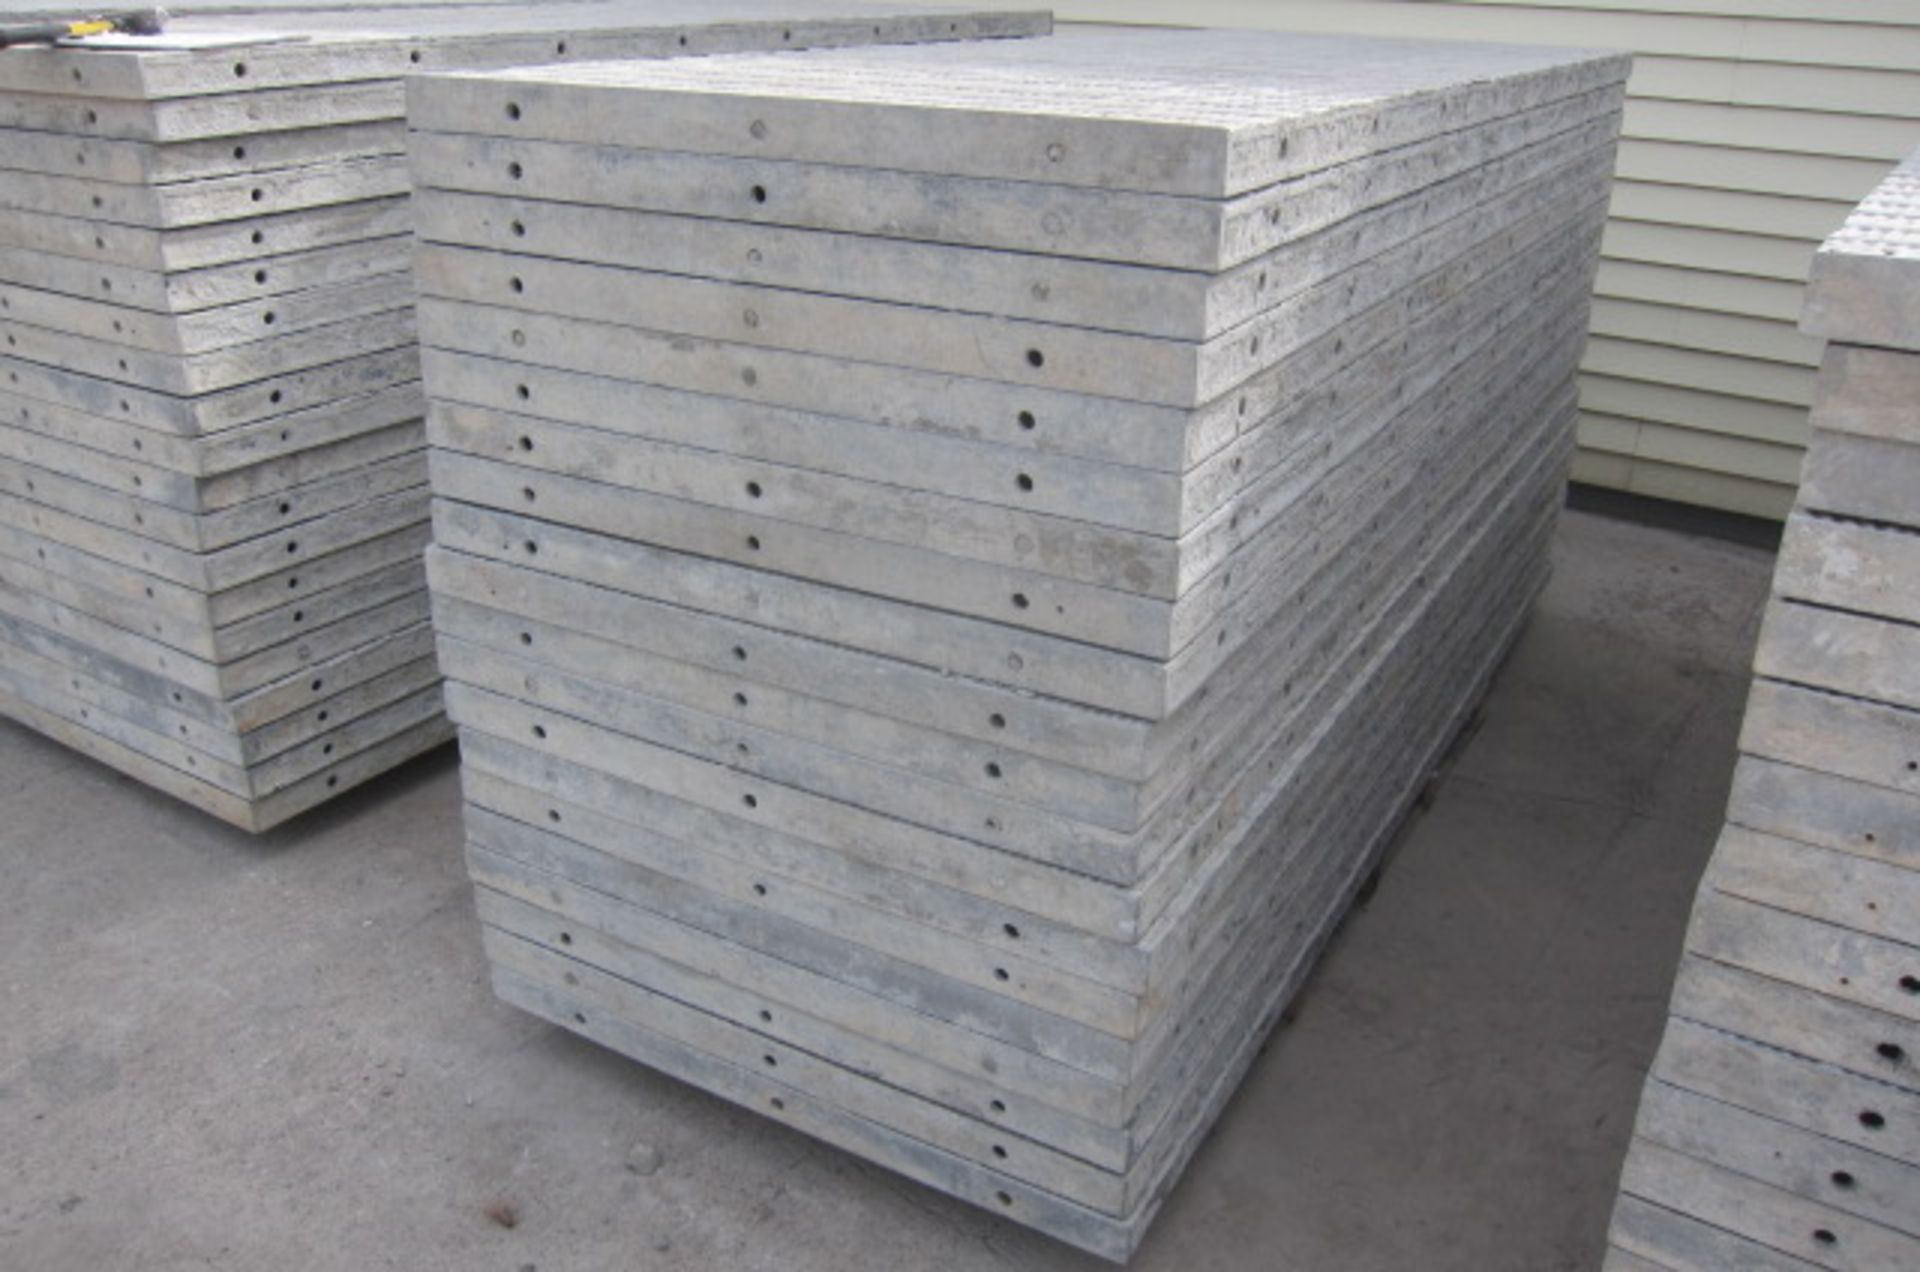 (20) 36" X 8' Wall-ties Aluminum Concrete Forms, VertiBrick, 6-12 Hole Pattern, Nice Clean Set, - Image 4 of 4